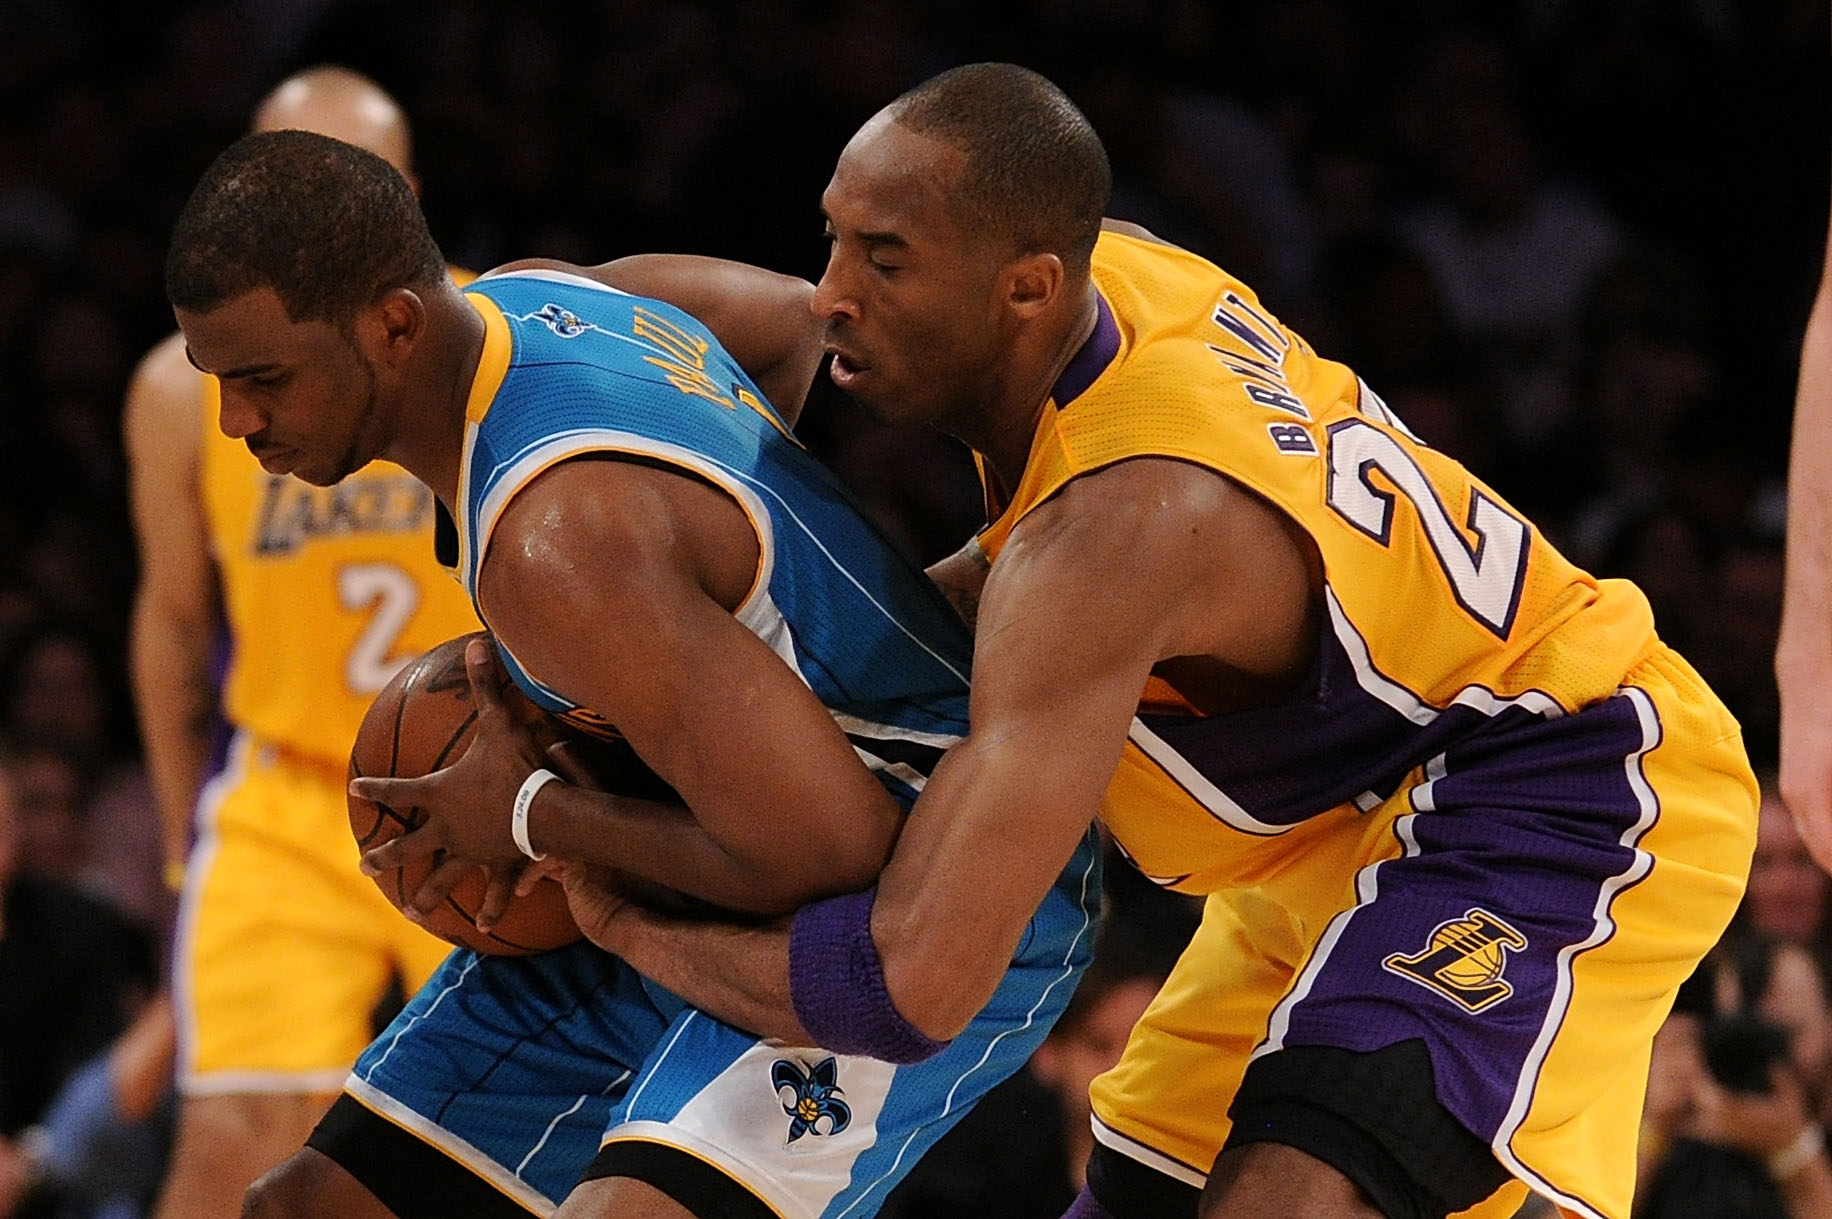 LOS ANGELES, CA - APRIL 20:  Chris Paul #3 of the New Orleans Hornets holds the ball as Kobe Bryant #24 of the Los Angeles Lakers goes after it from behind in the second quarter in Game Two of the Western Conference Quarterfinals in the 2011 NBA Playoffs